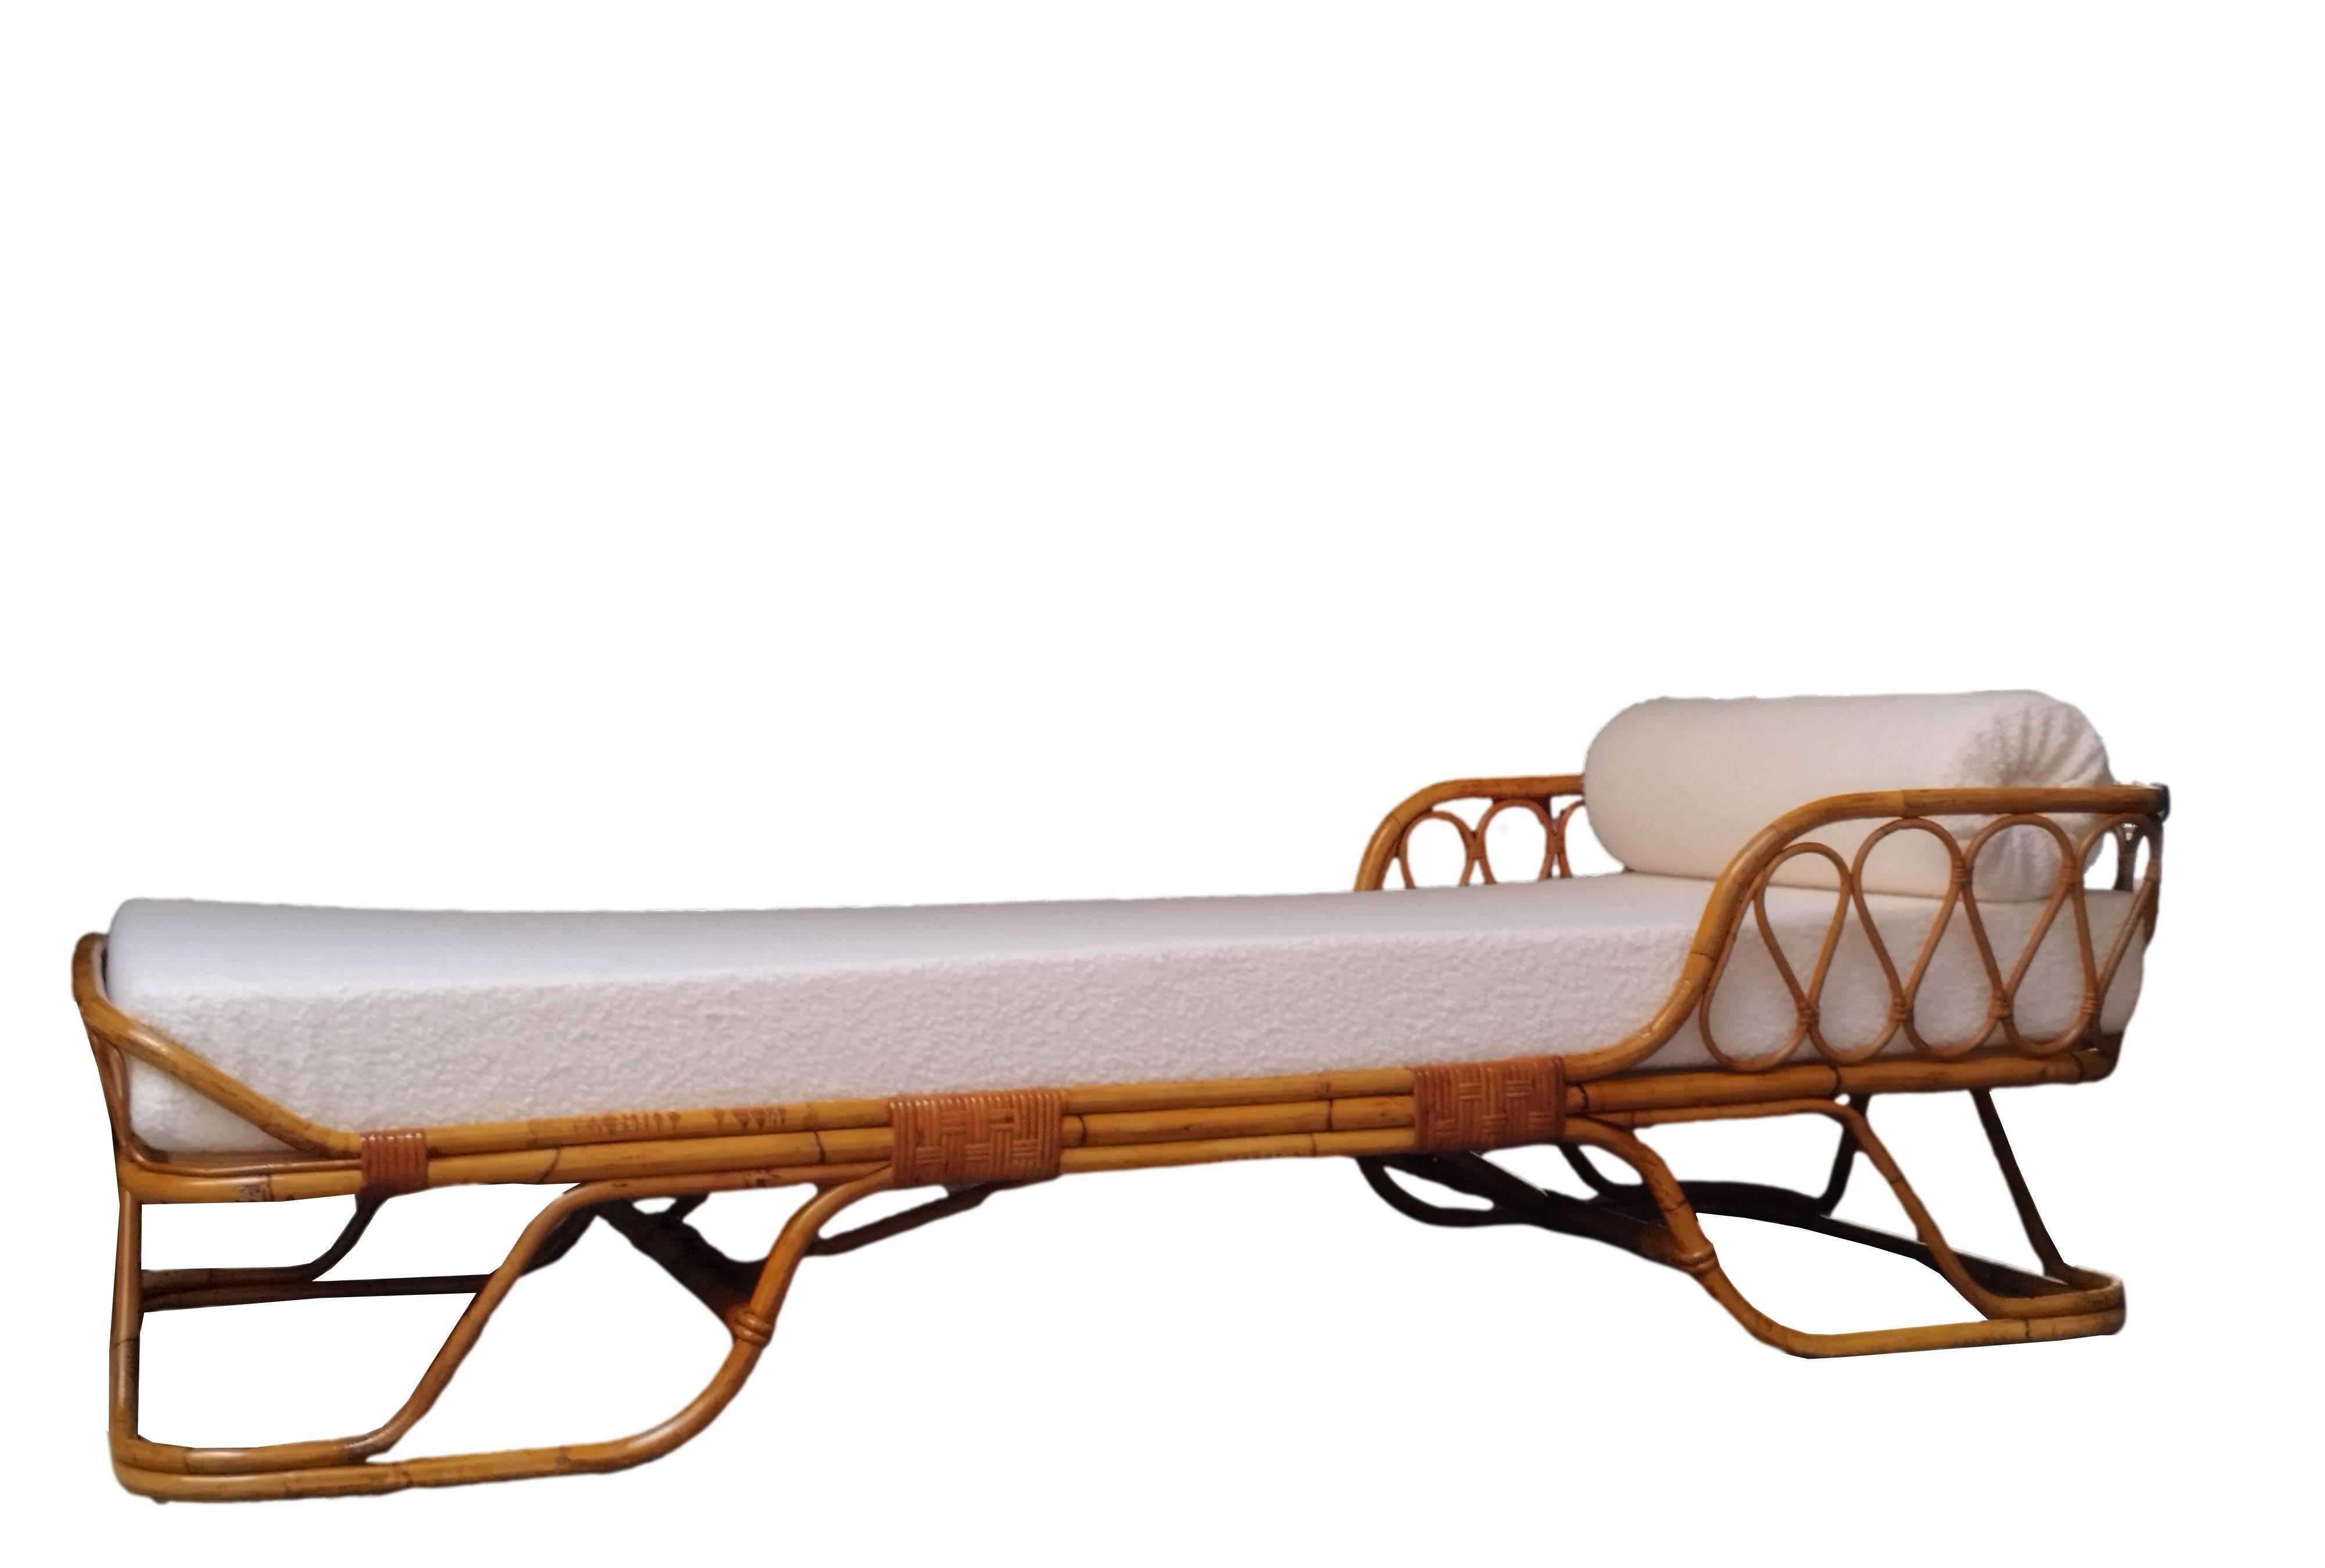 A splendid curved bamboo daybed designed by Tito Agnoli for Bonacina in the 1960s. The bed is made entirely of a bamboo frame, rattan and rush joints with a continuous circular pattern in bamboo.